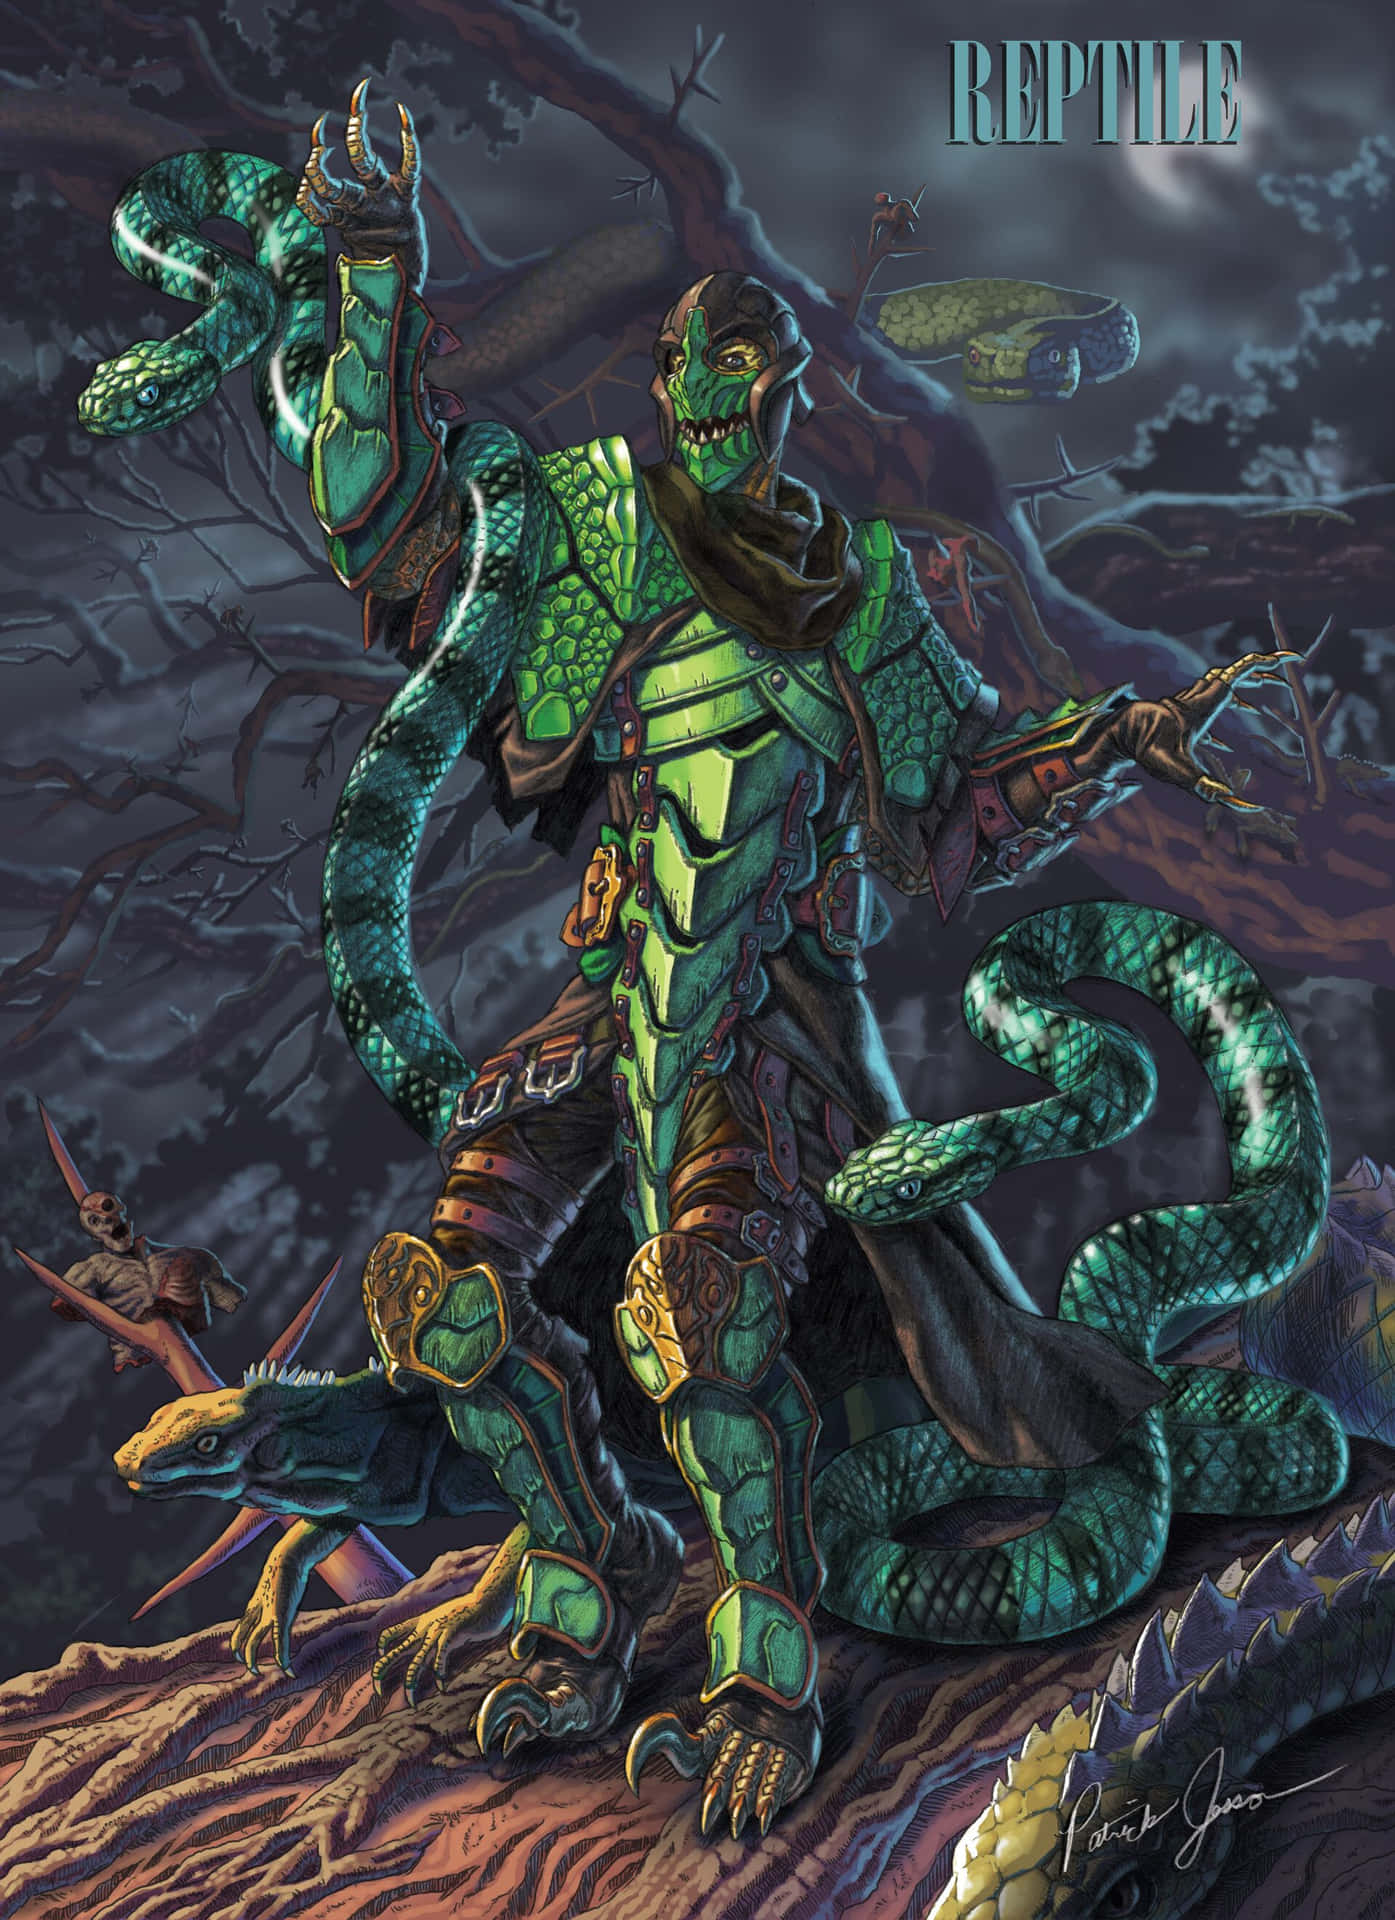 Download Deadly Reptile from Mortal Kombat in Action Wallpaper ...